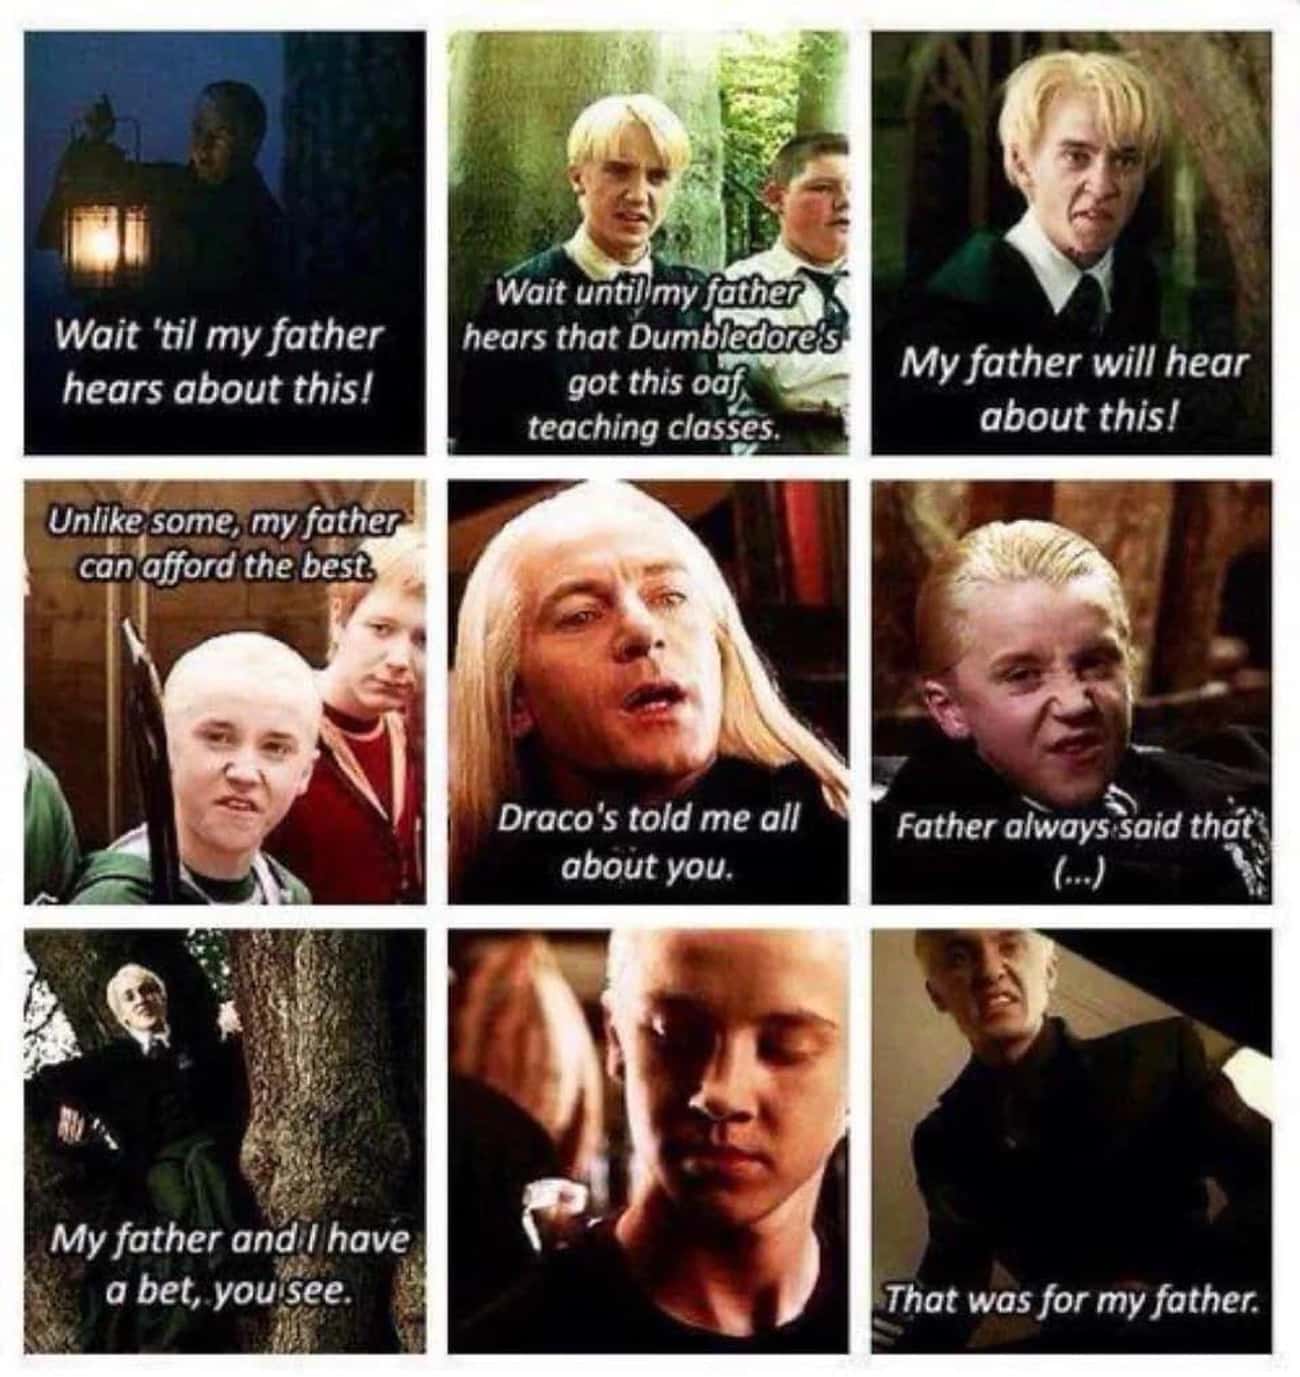 Malfoy Mentions How His Father Will Hear About His Complaints